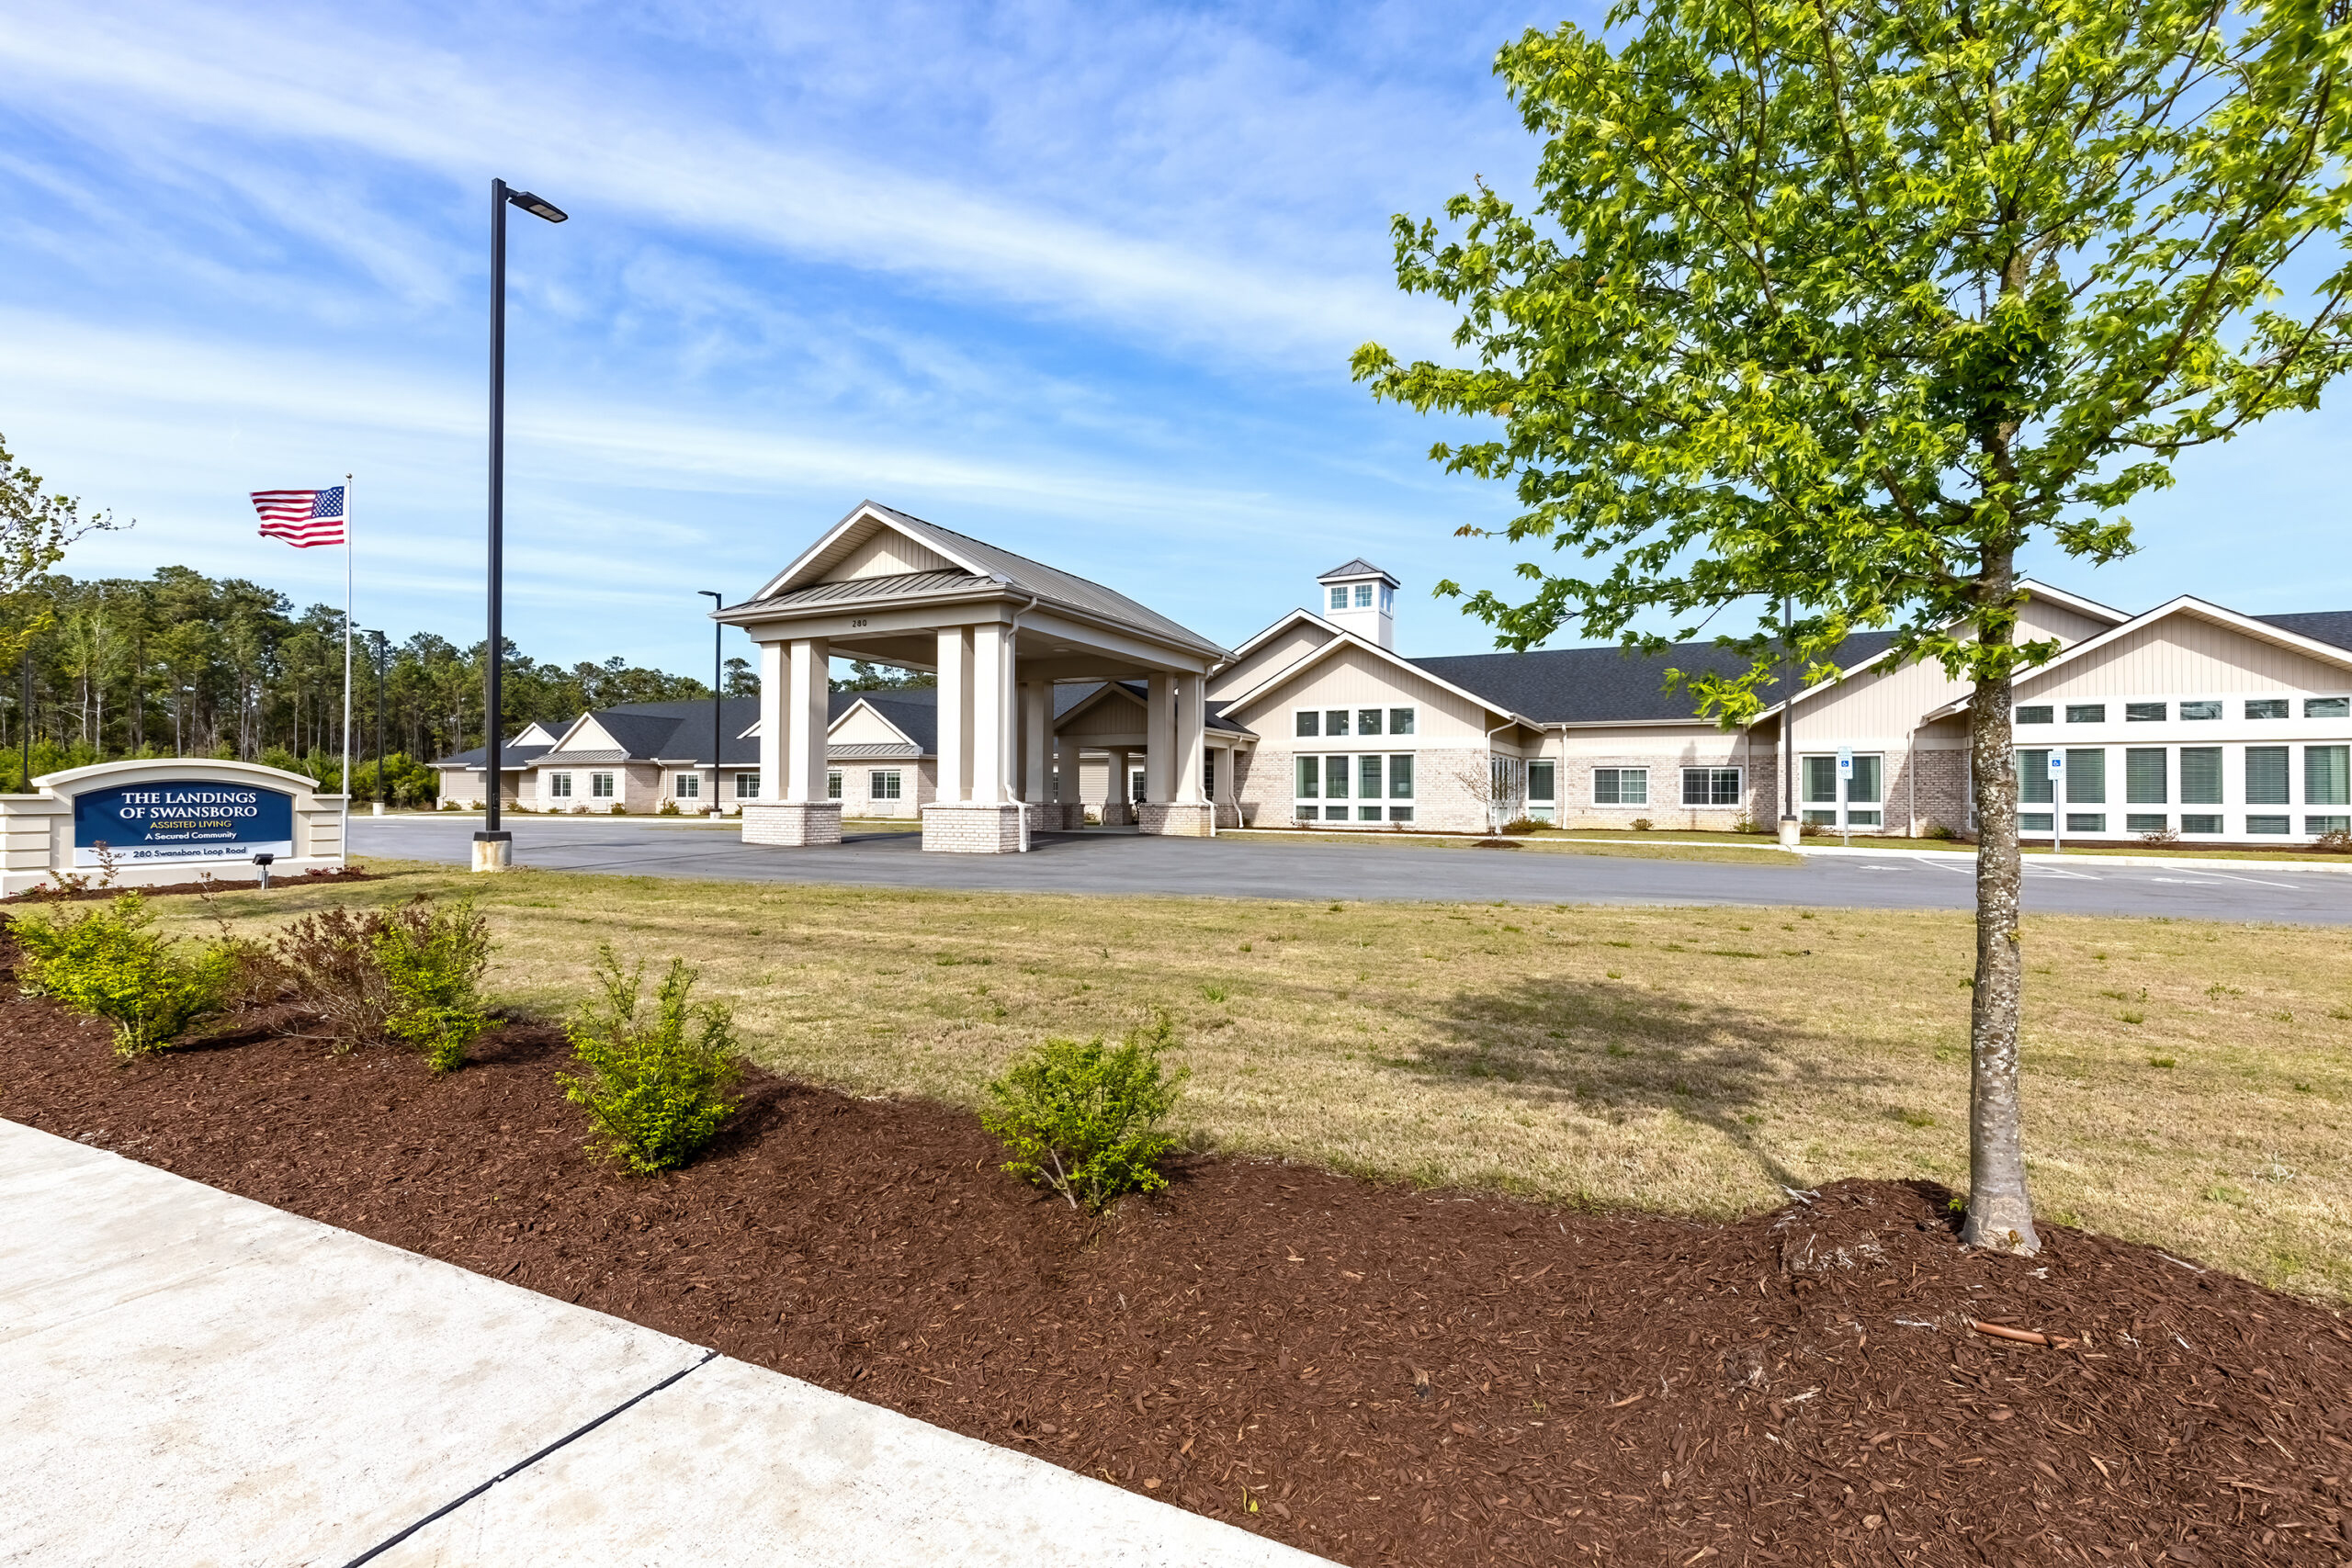 The Landings of Swansboro will host its one-year anniversary with an open house and its official ribbon cutting on May 17 at 2 p.m. Photo Provided by The Landings of Swansboro